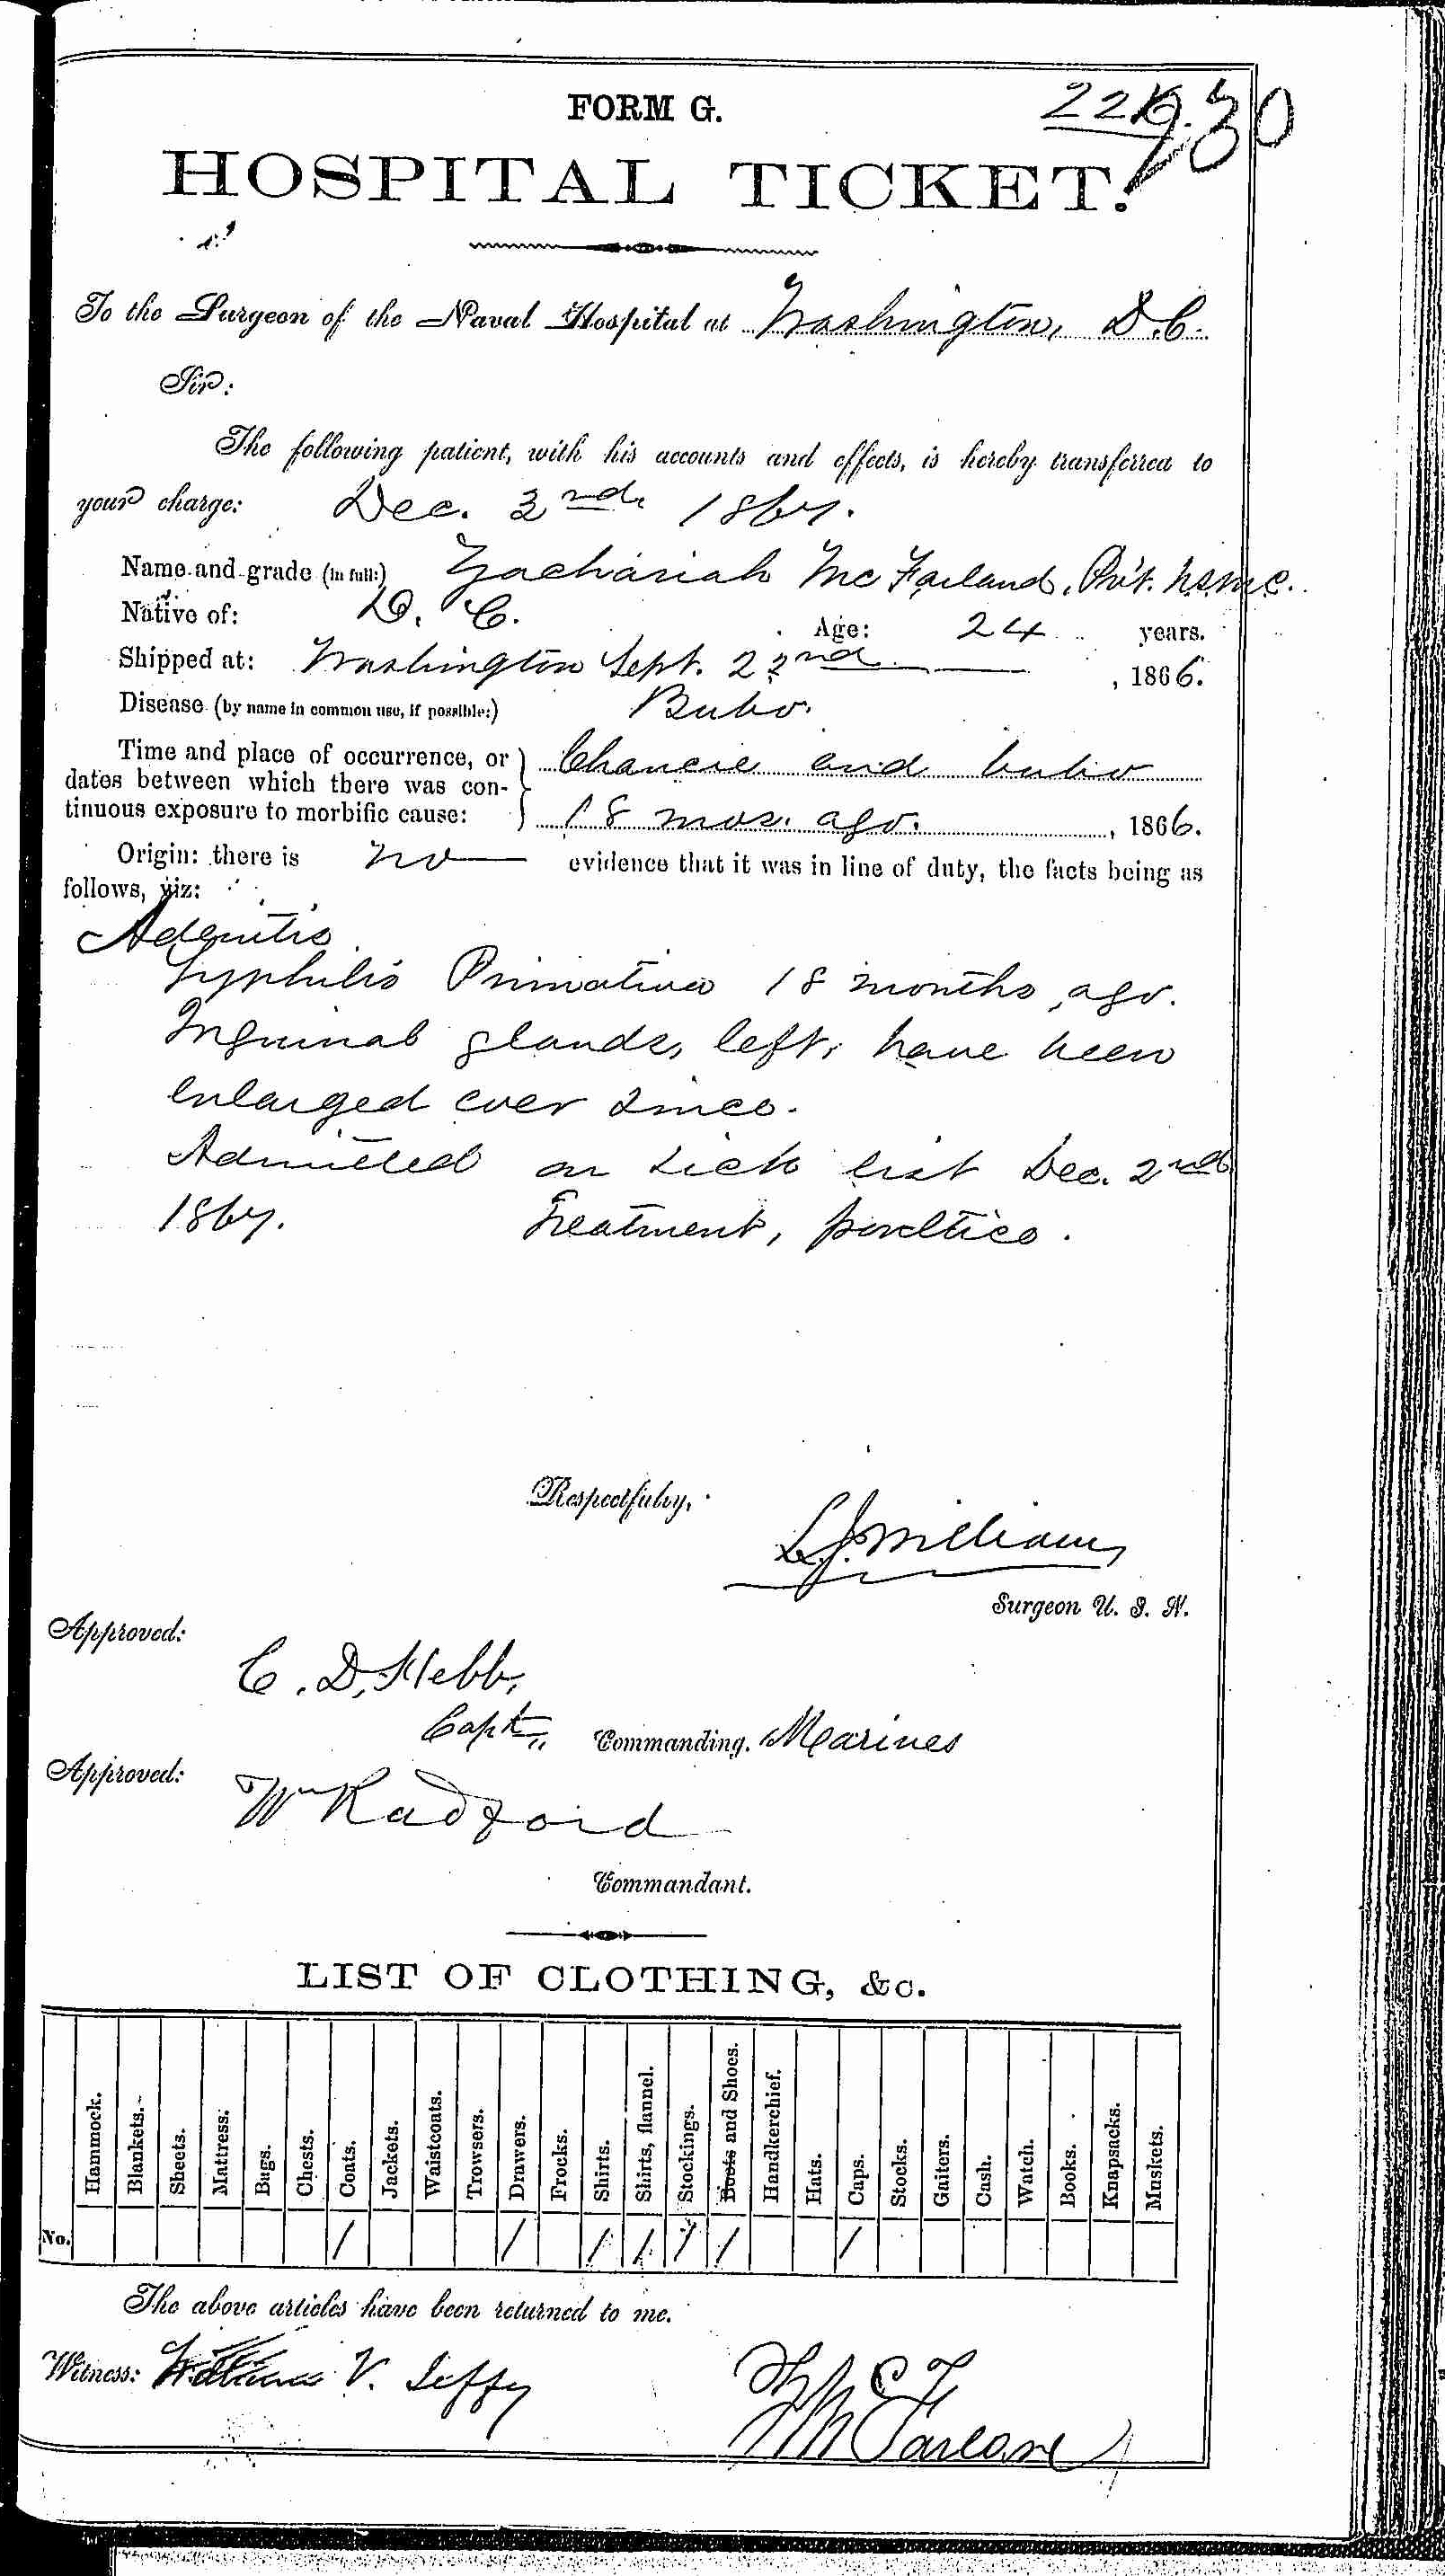 Entry for Zachariah McFarland (page 1 of 2) in the log Hospital Tickets and Case Papers - Naval Hospital - Washington, D.C. - 1866-68